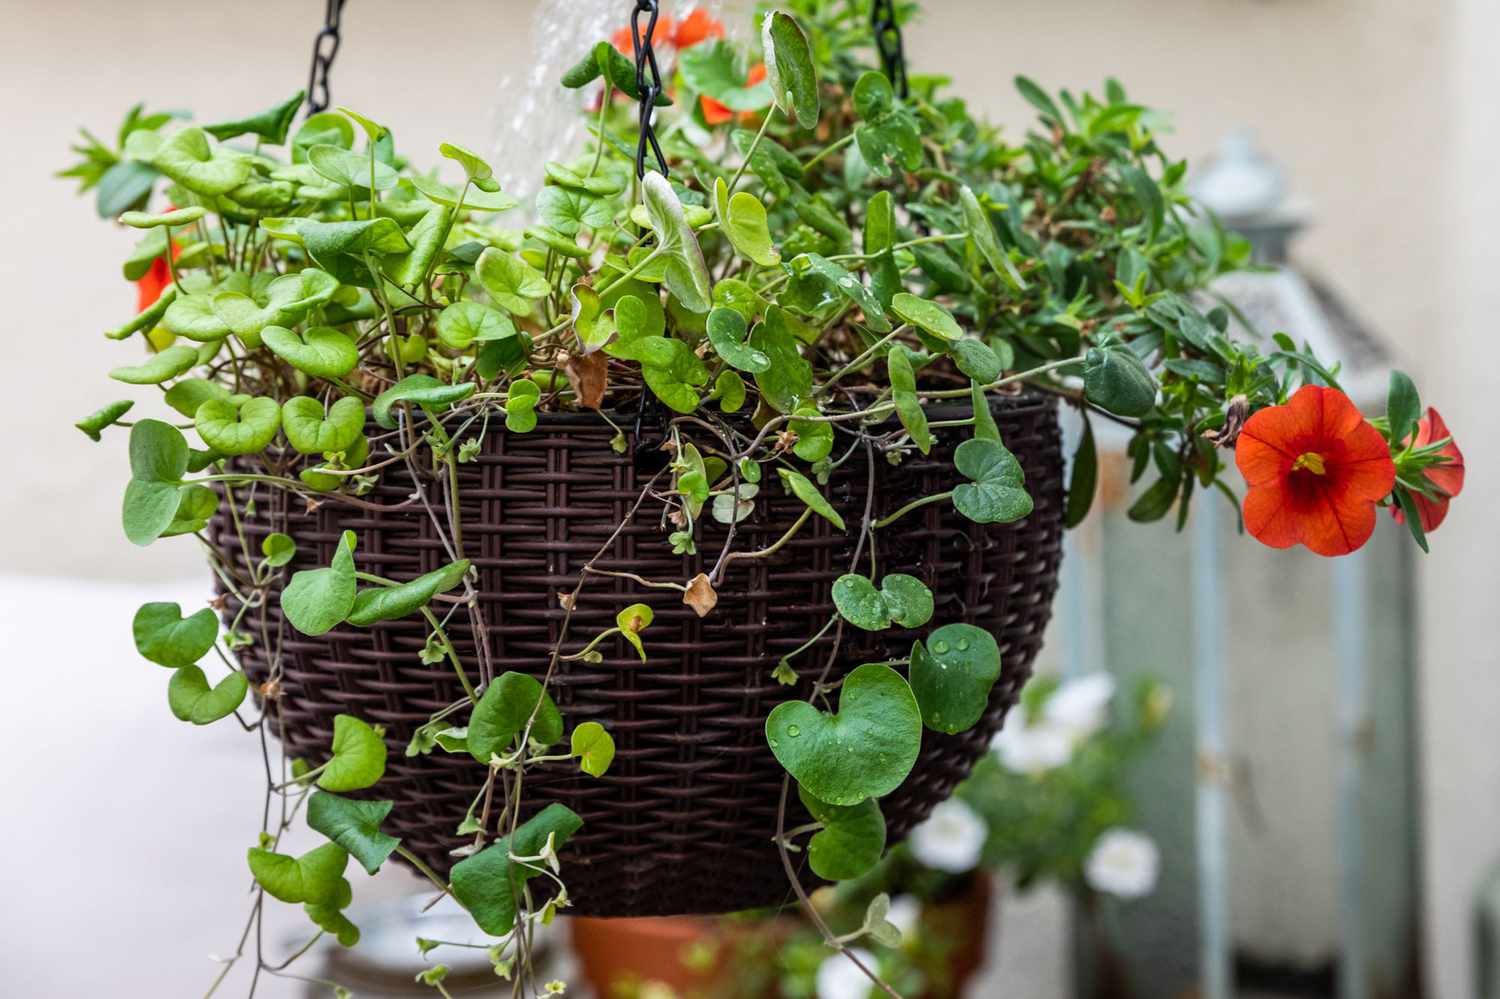 Dichondra plant in brown hanging basket with red flower stems and leaves hanging over